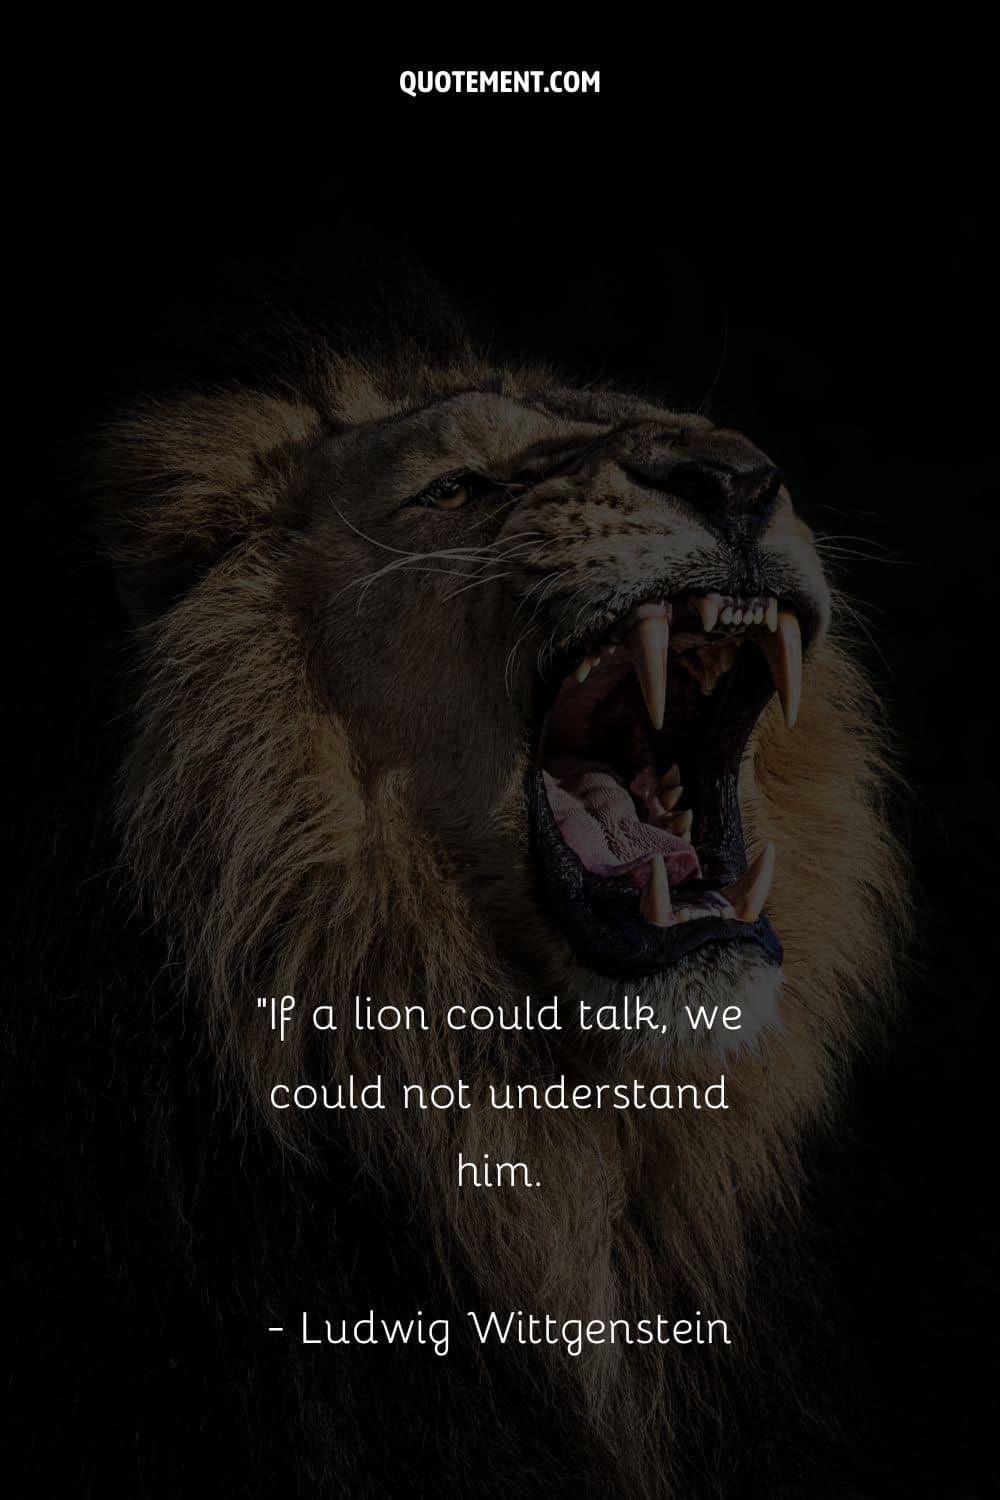 image or roaring lion representing life quote about lions